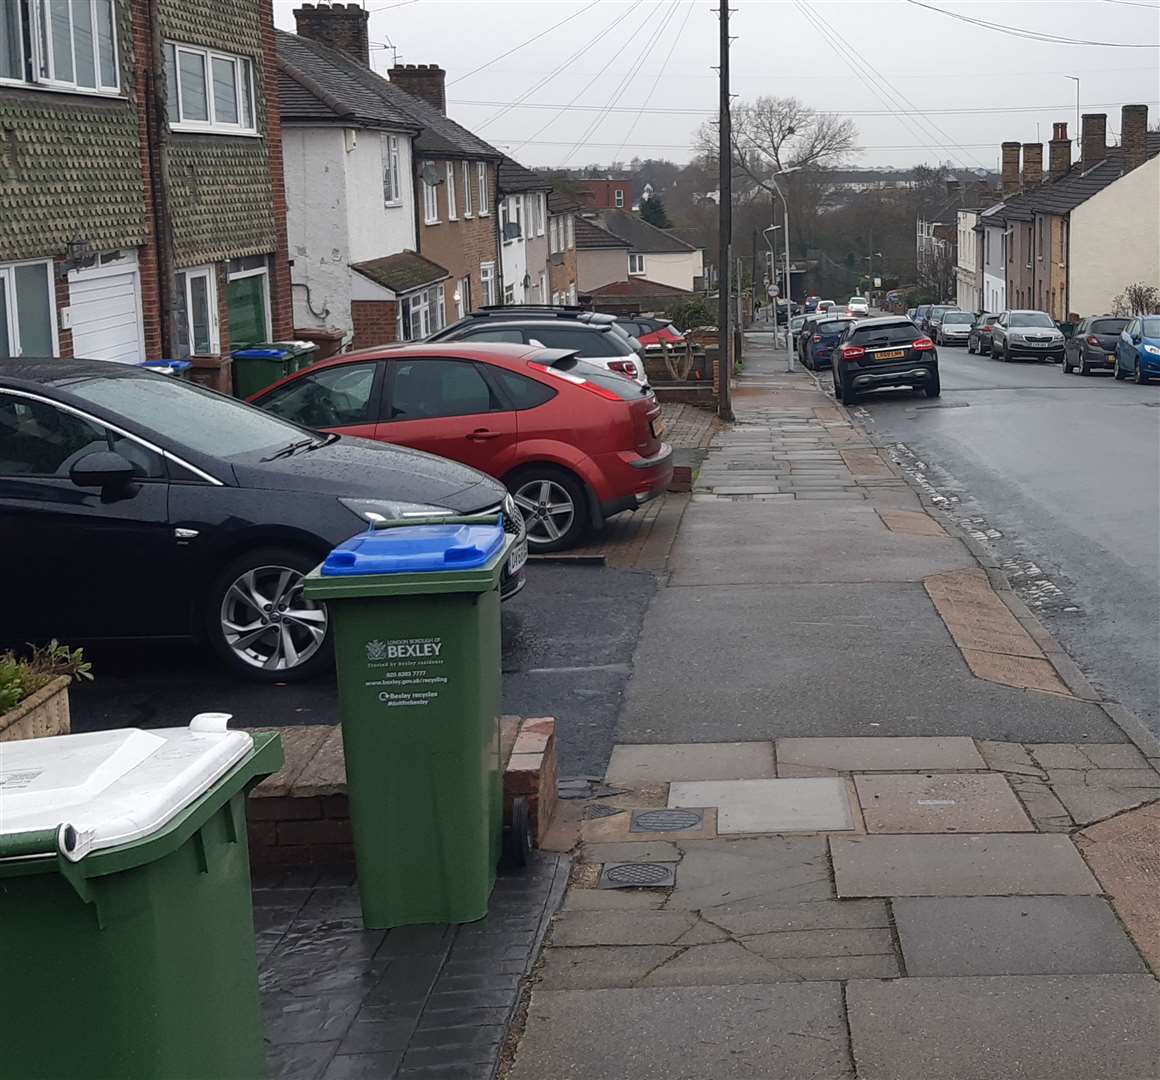 Bins have not been collected in parts of Bexley